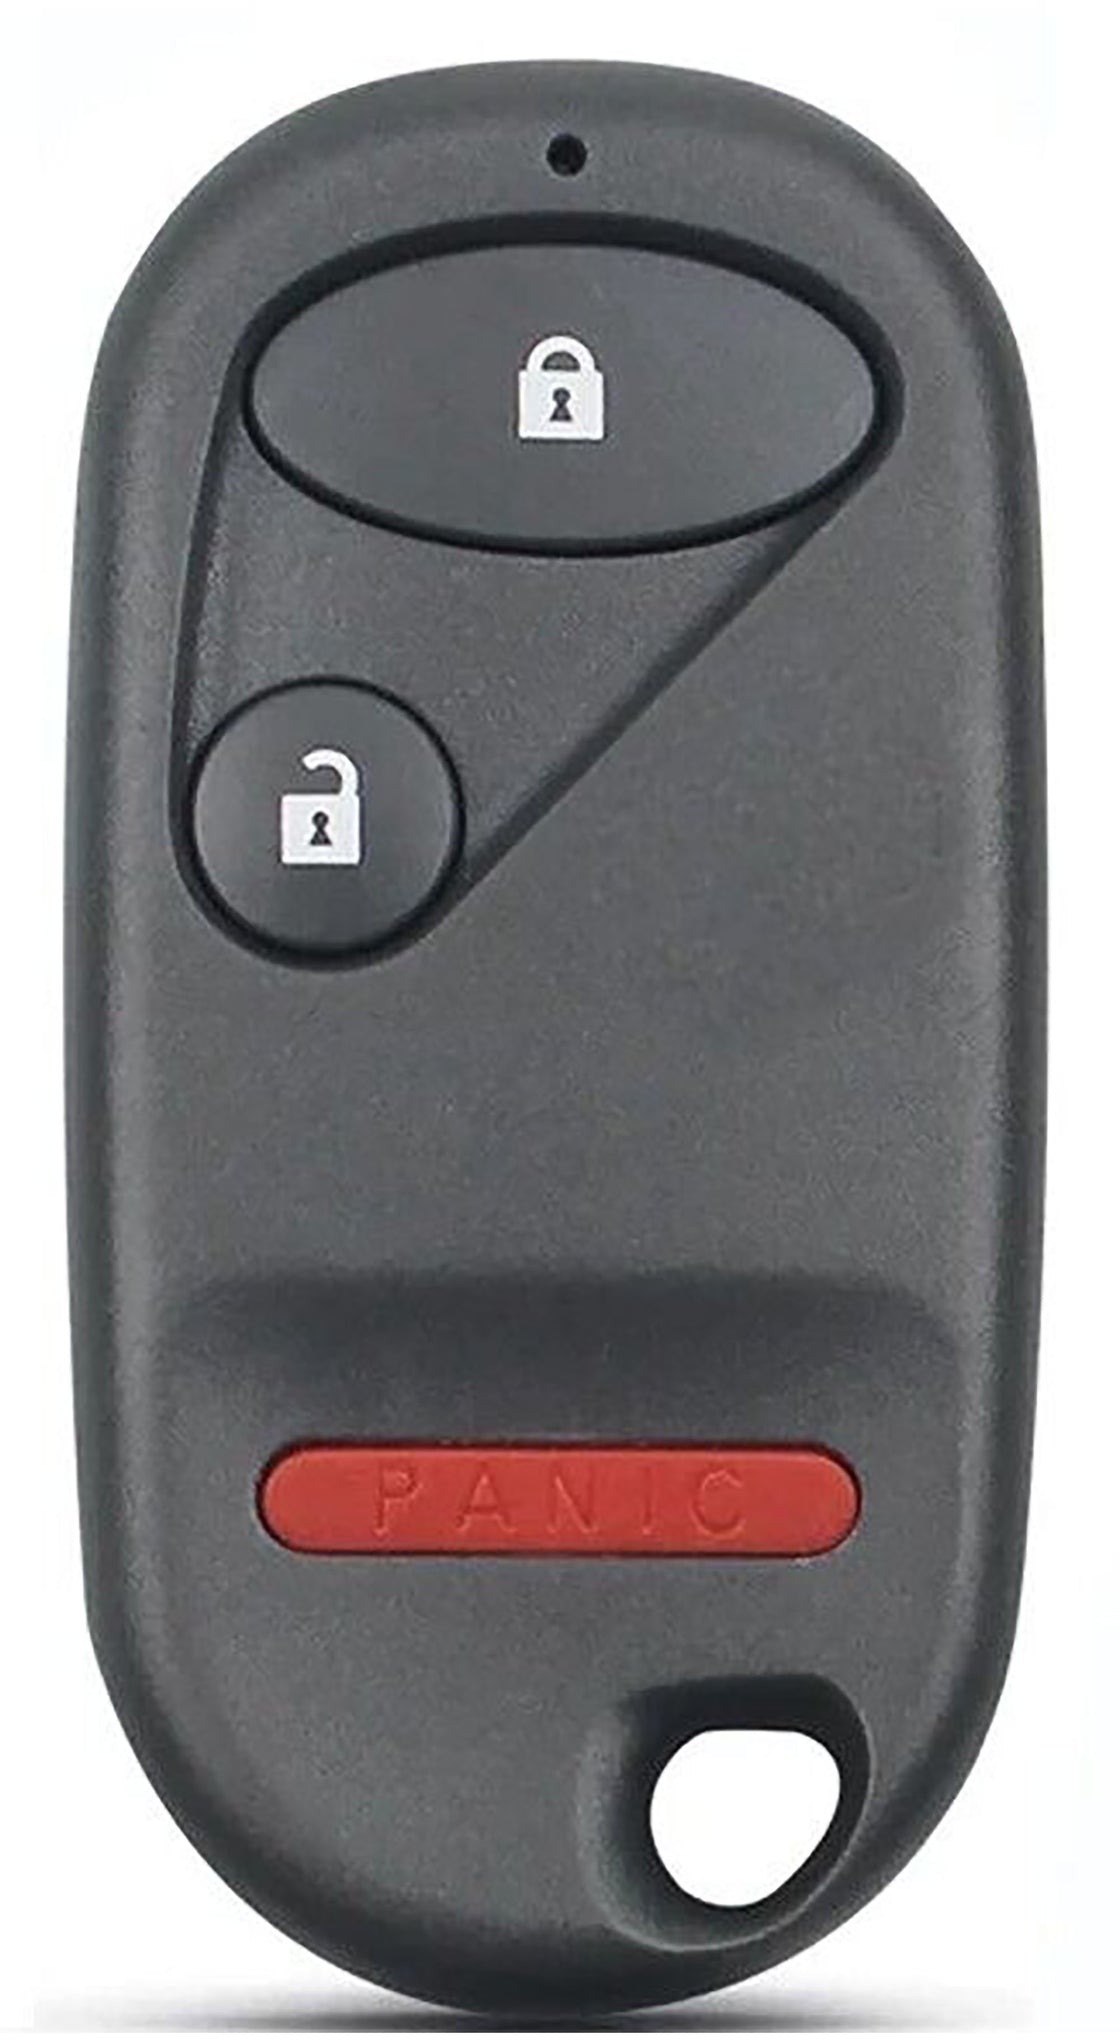 1x New Replacement Remote Key Fob Compatible with & Fit For Honda Vehicles A269ZUA106 - MPN A269ZUA106-02